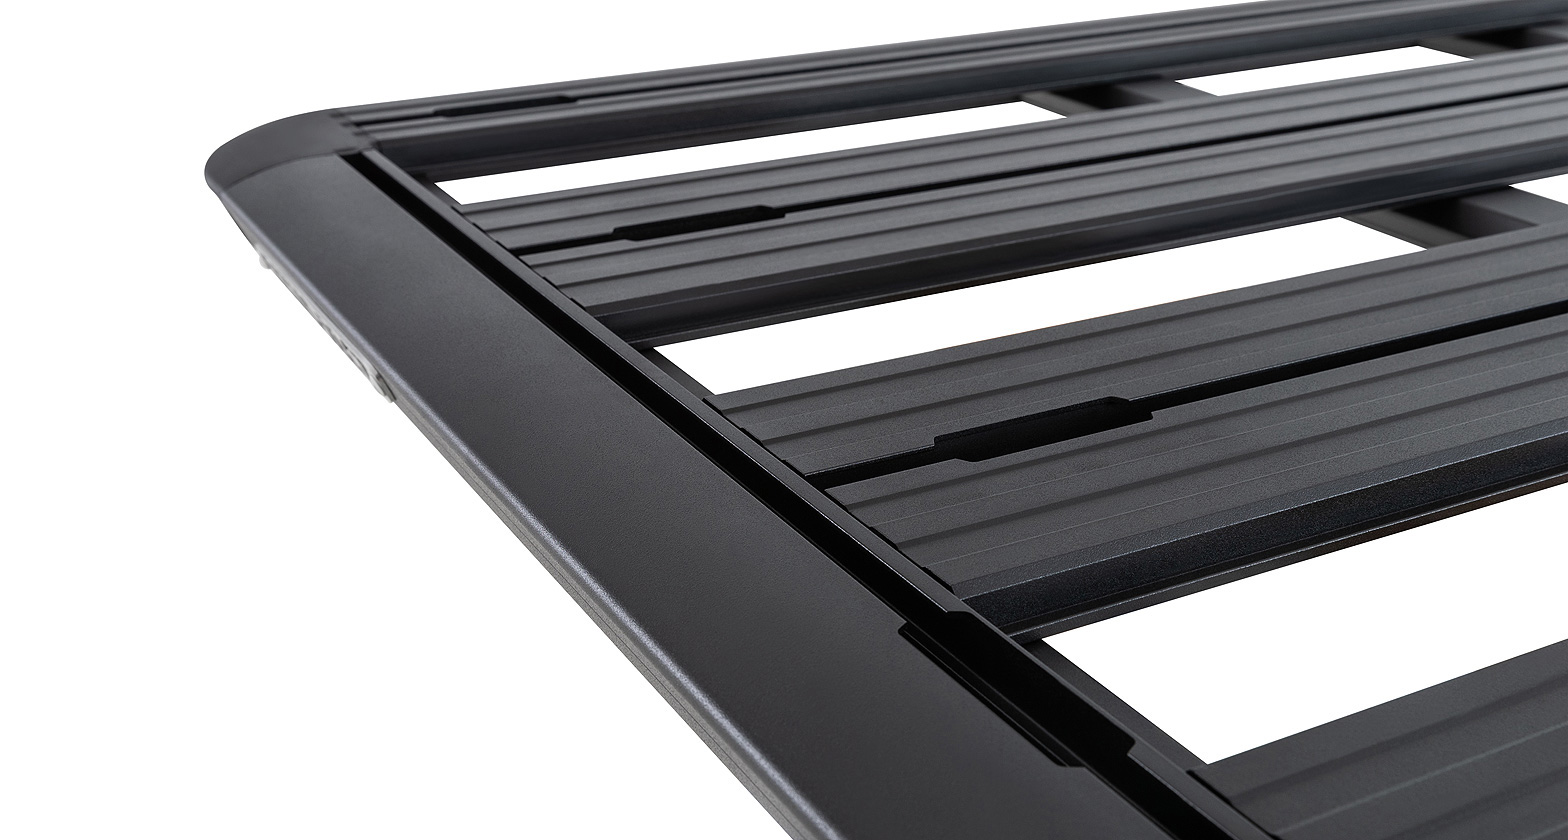 Rhino Rack JB1720 Pioneer Platform (1528mm x 1236mm) with Backbone for Toyota Hilux N70 4dr Ute with Bare Roof (2005 to 2015) - Track Mount